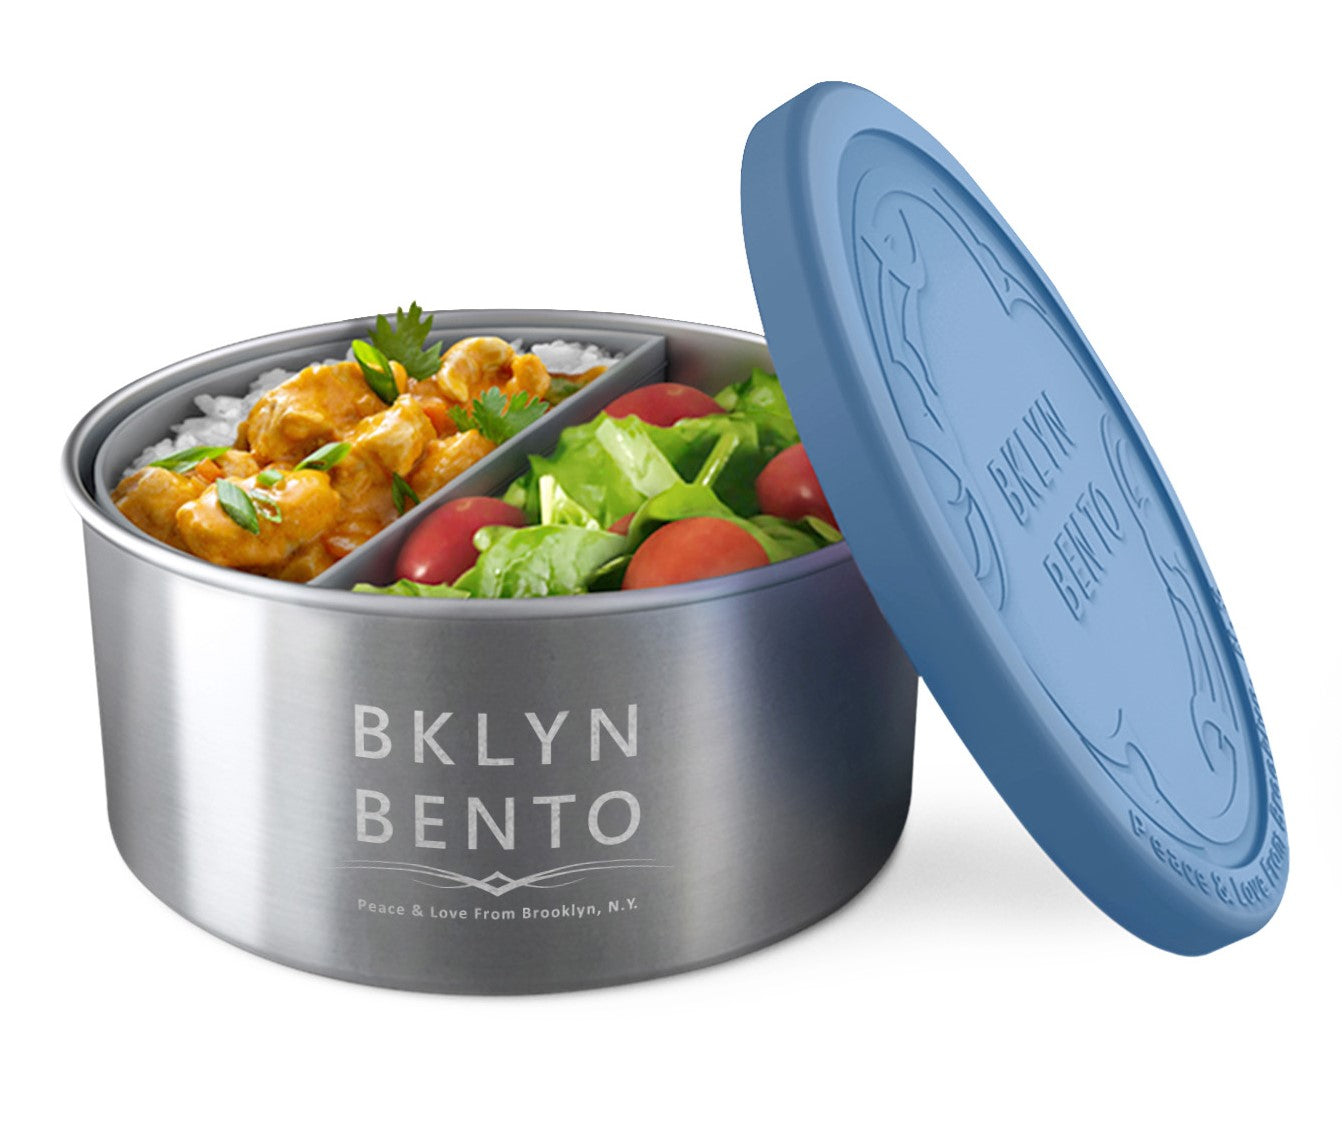 Bklyn Bento Large Round Stainless Steel Lunch Box Container With Removable Silicone Food Separator with Leakproof Lid